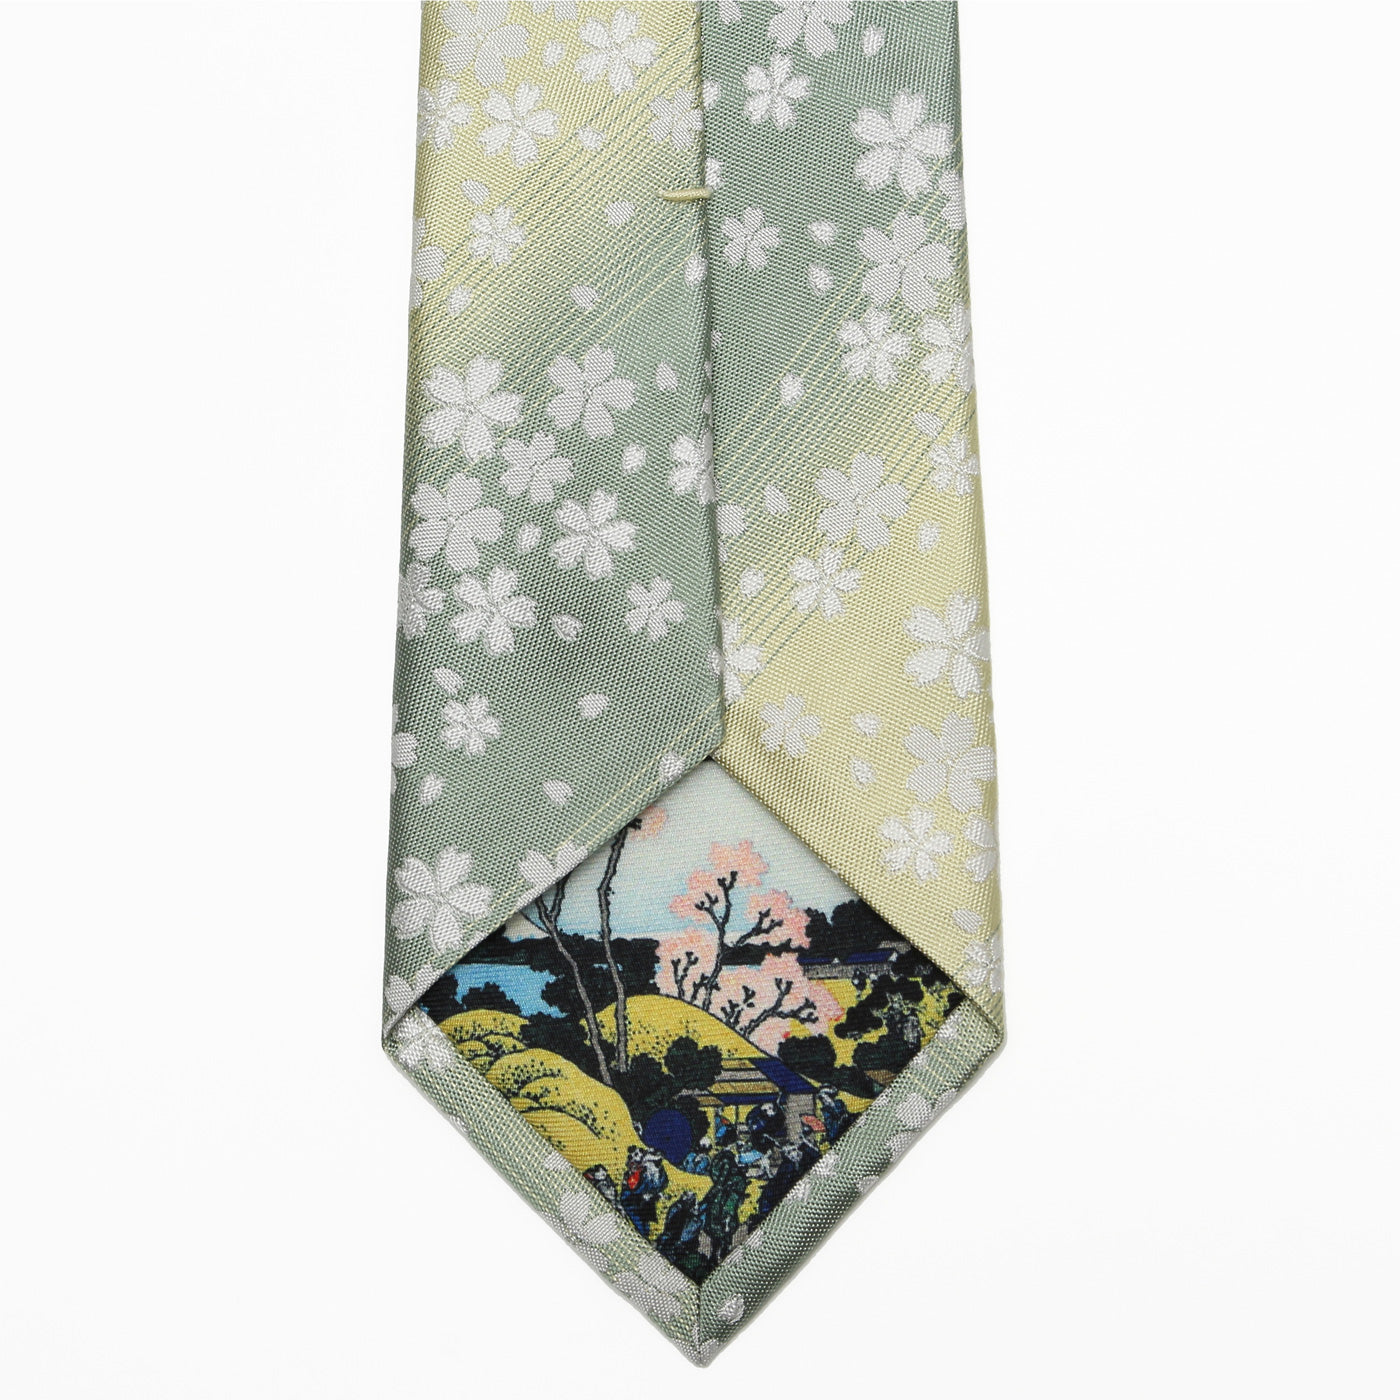 Men’s Jacquard Woven 100% Kyoto Silk Tie -24. Eternal Beauty- Cherry Blossoms Pattern Made in Japan FORTUNA Tokyo